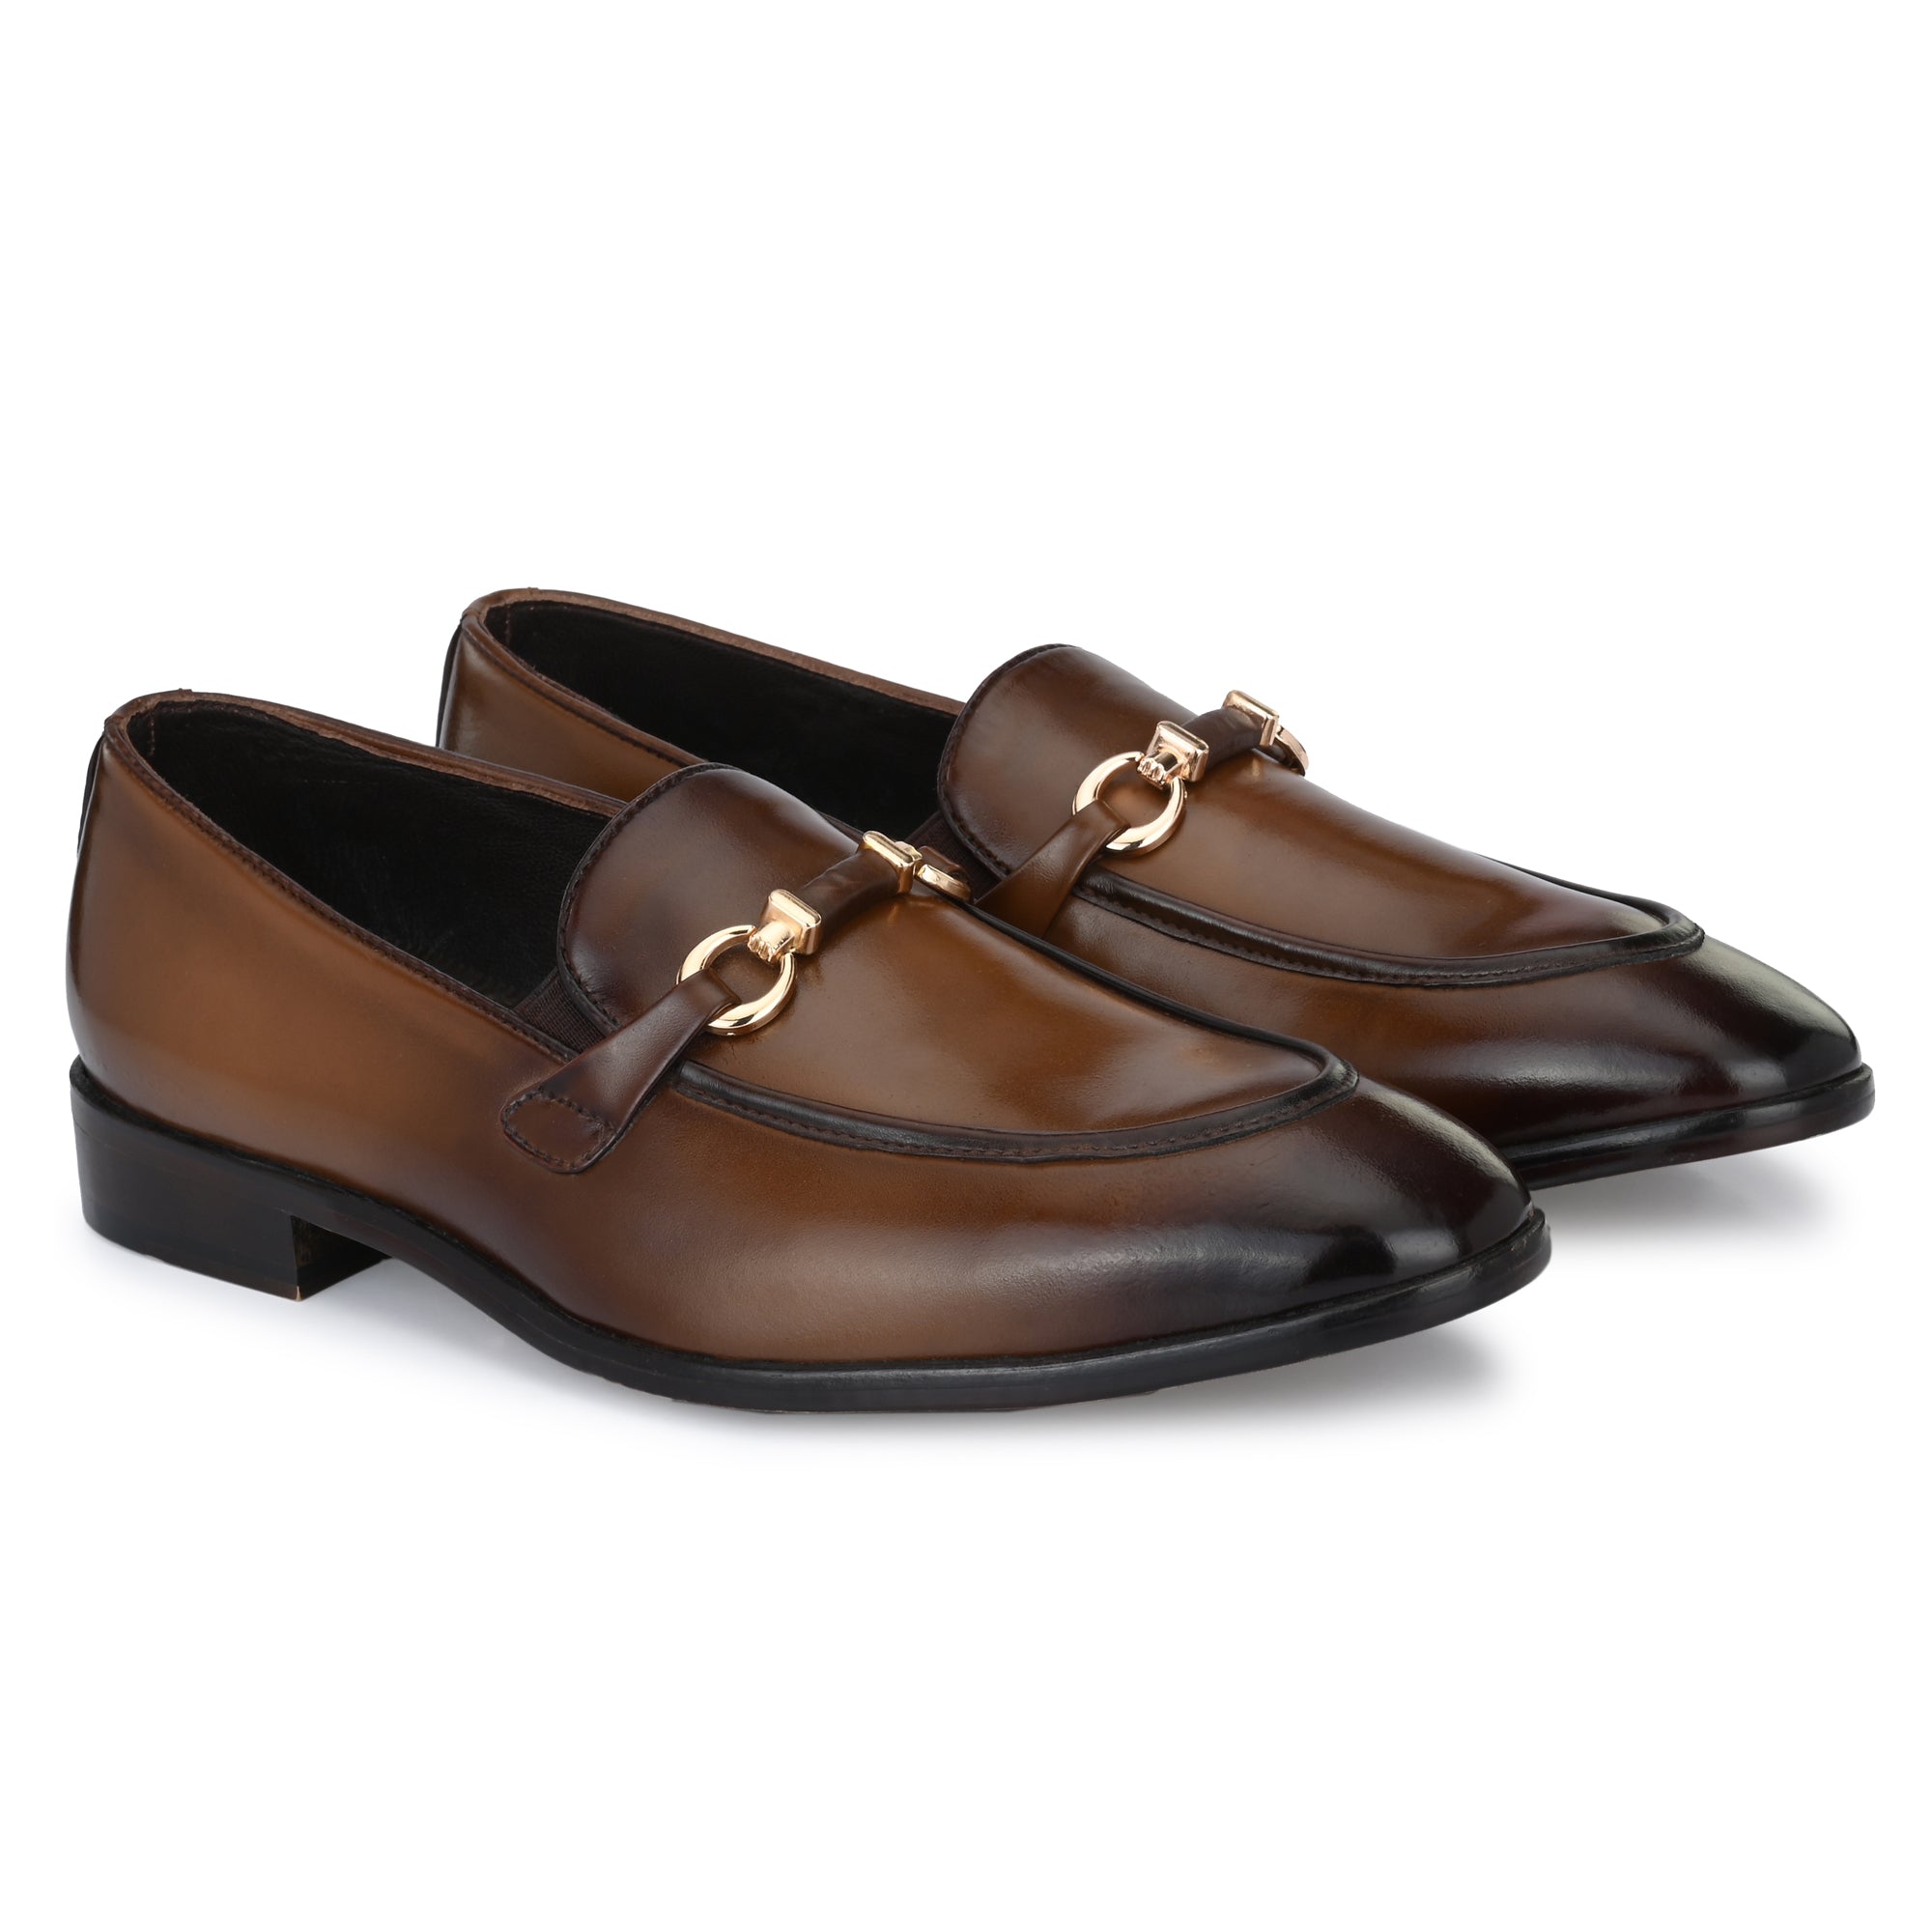 Buckled Formal Shoes for Men by Egoss